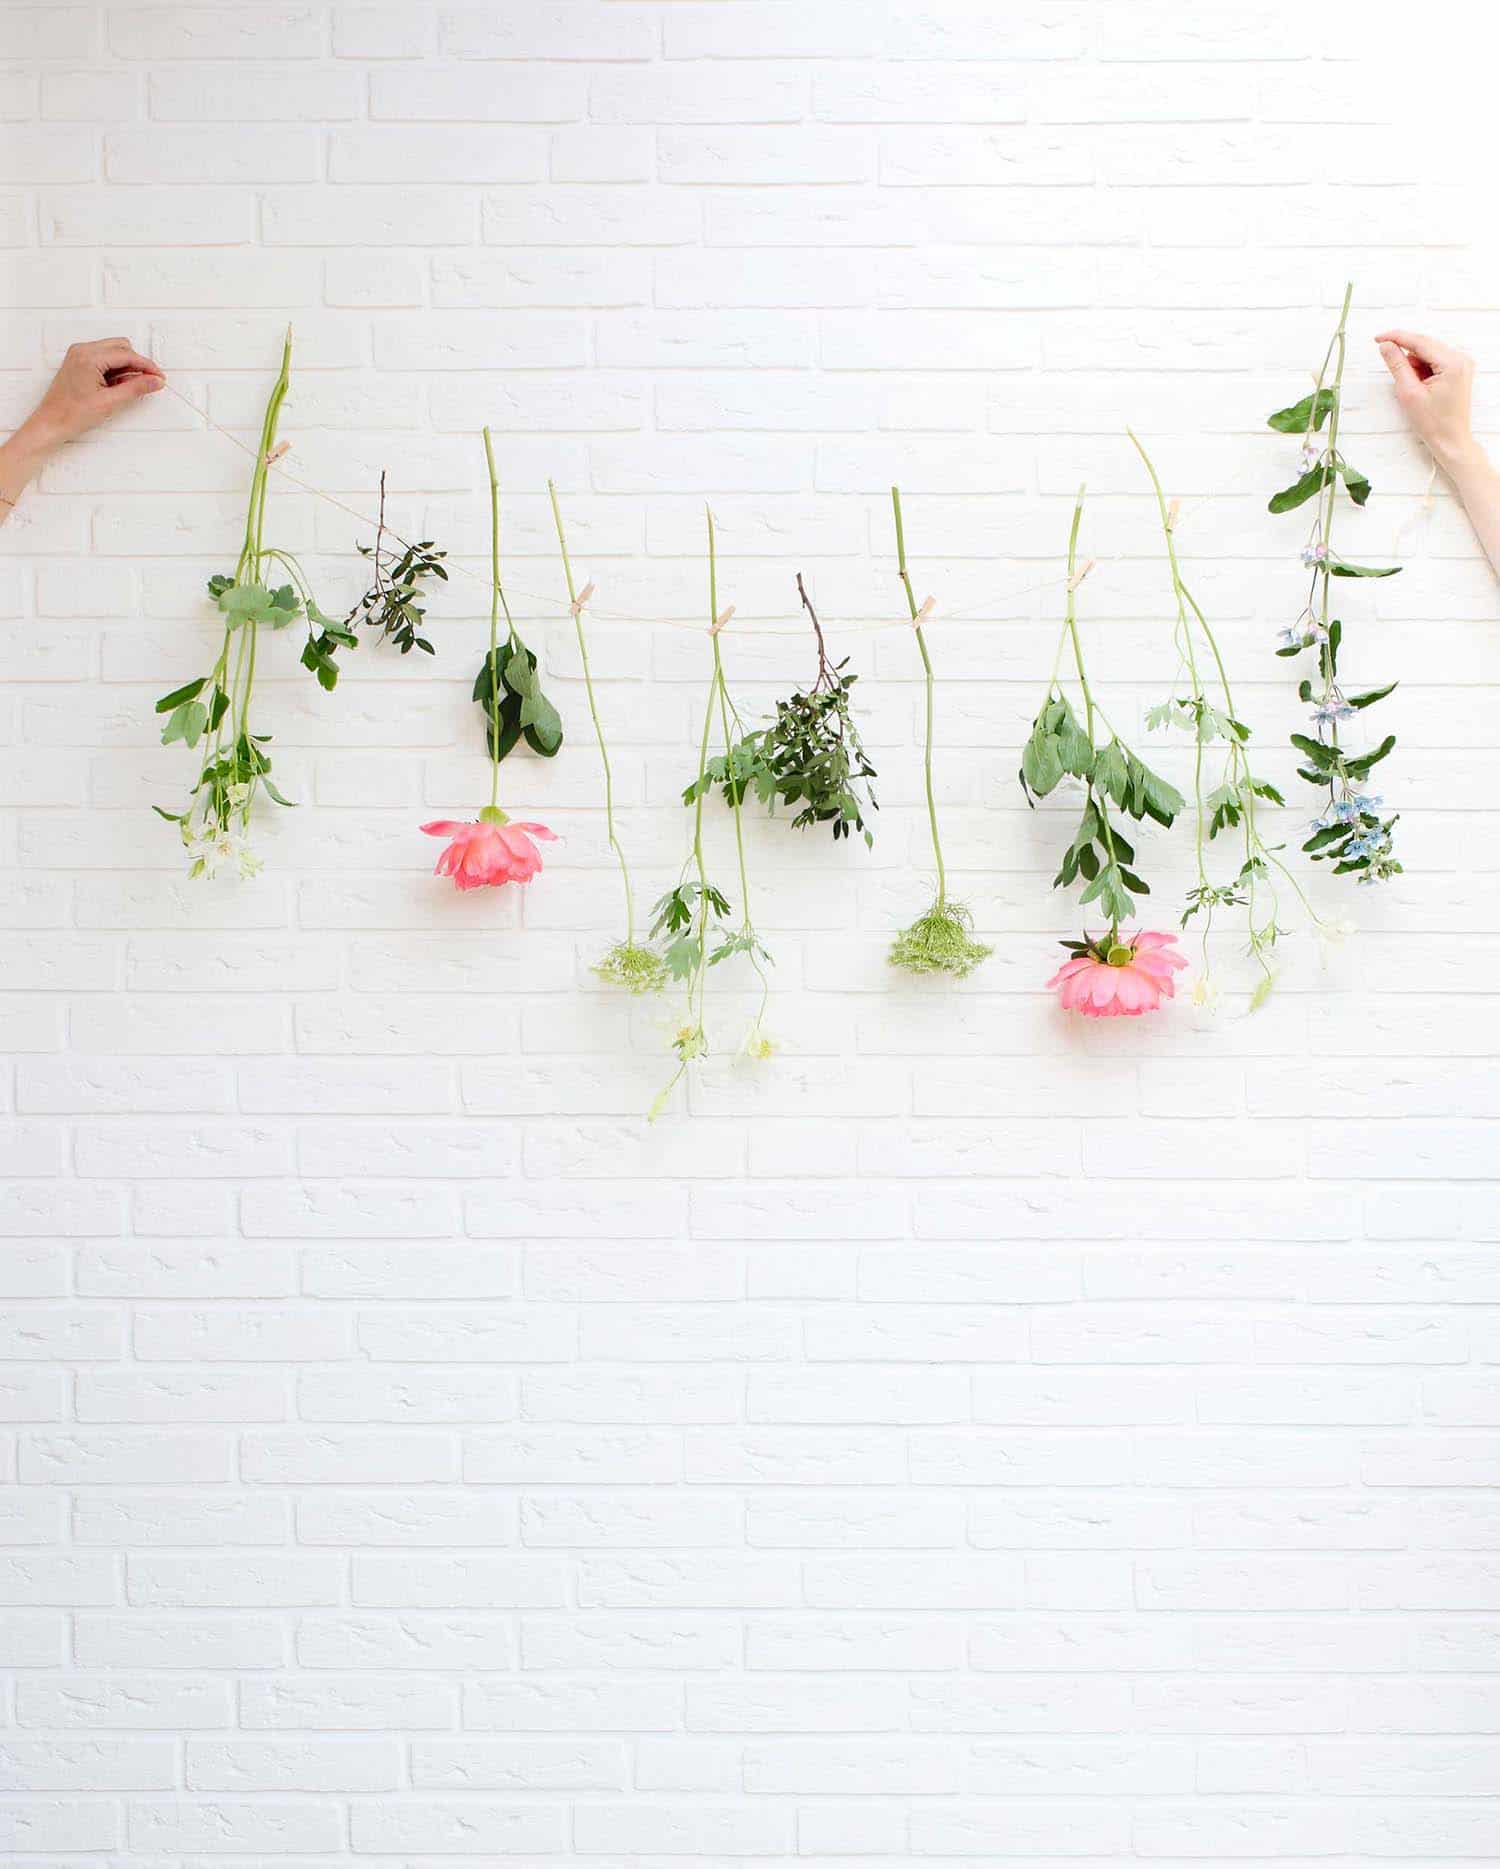 How-to-decorate-your-home-with-spring-floral-arrangements-12-1-kindesign